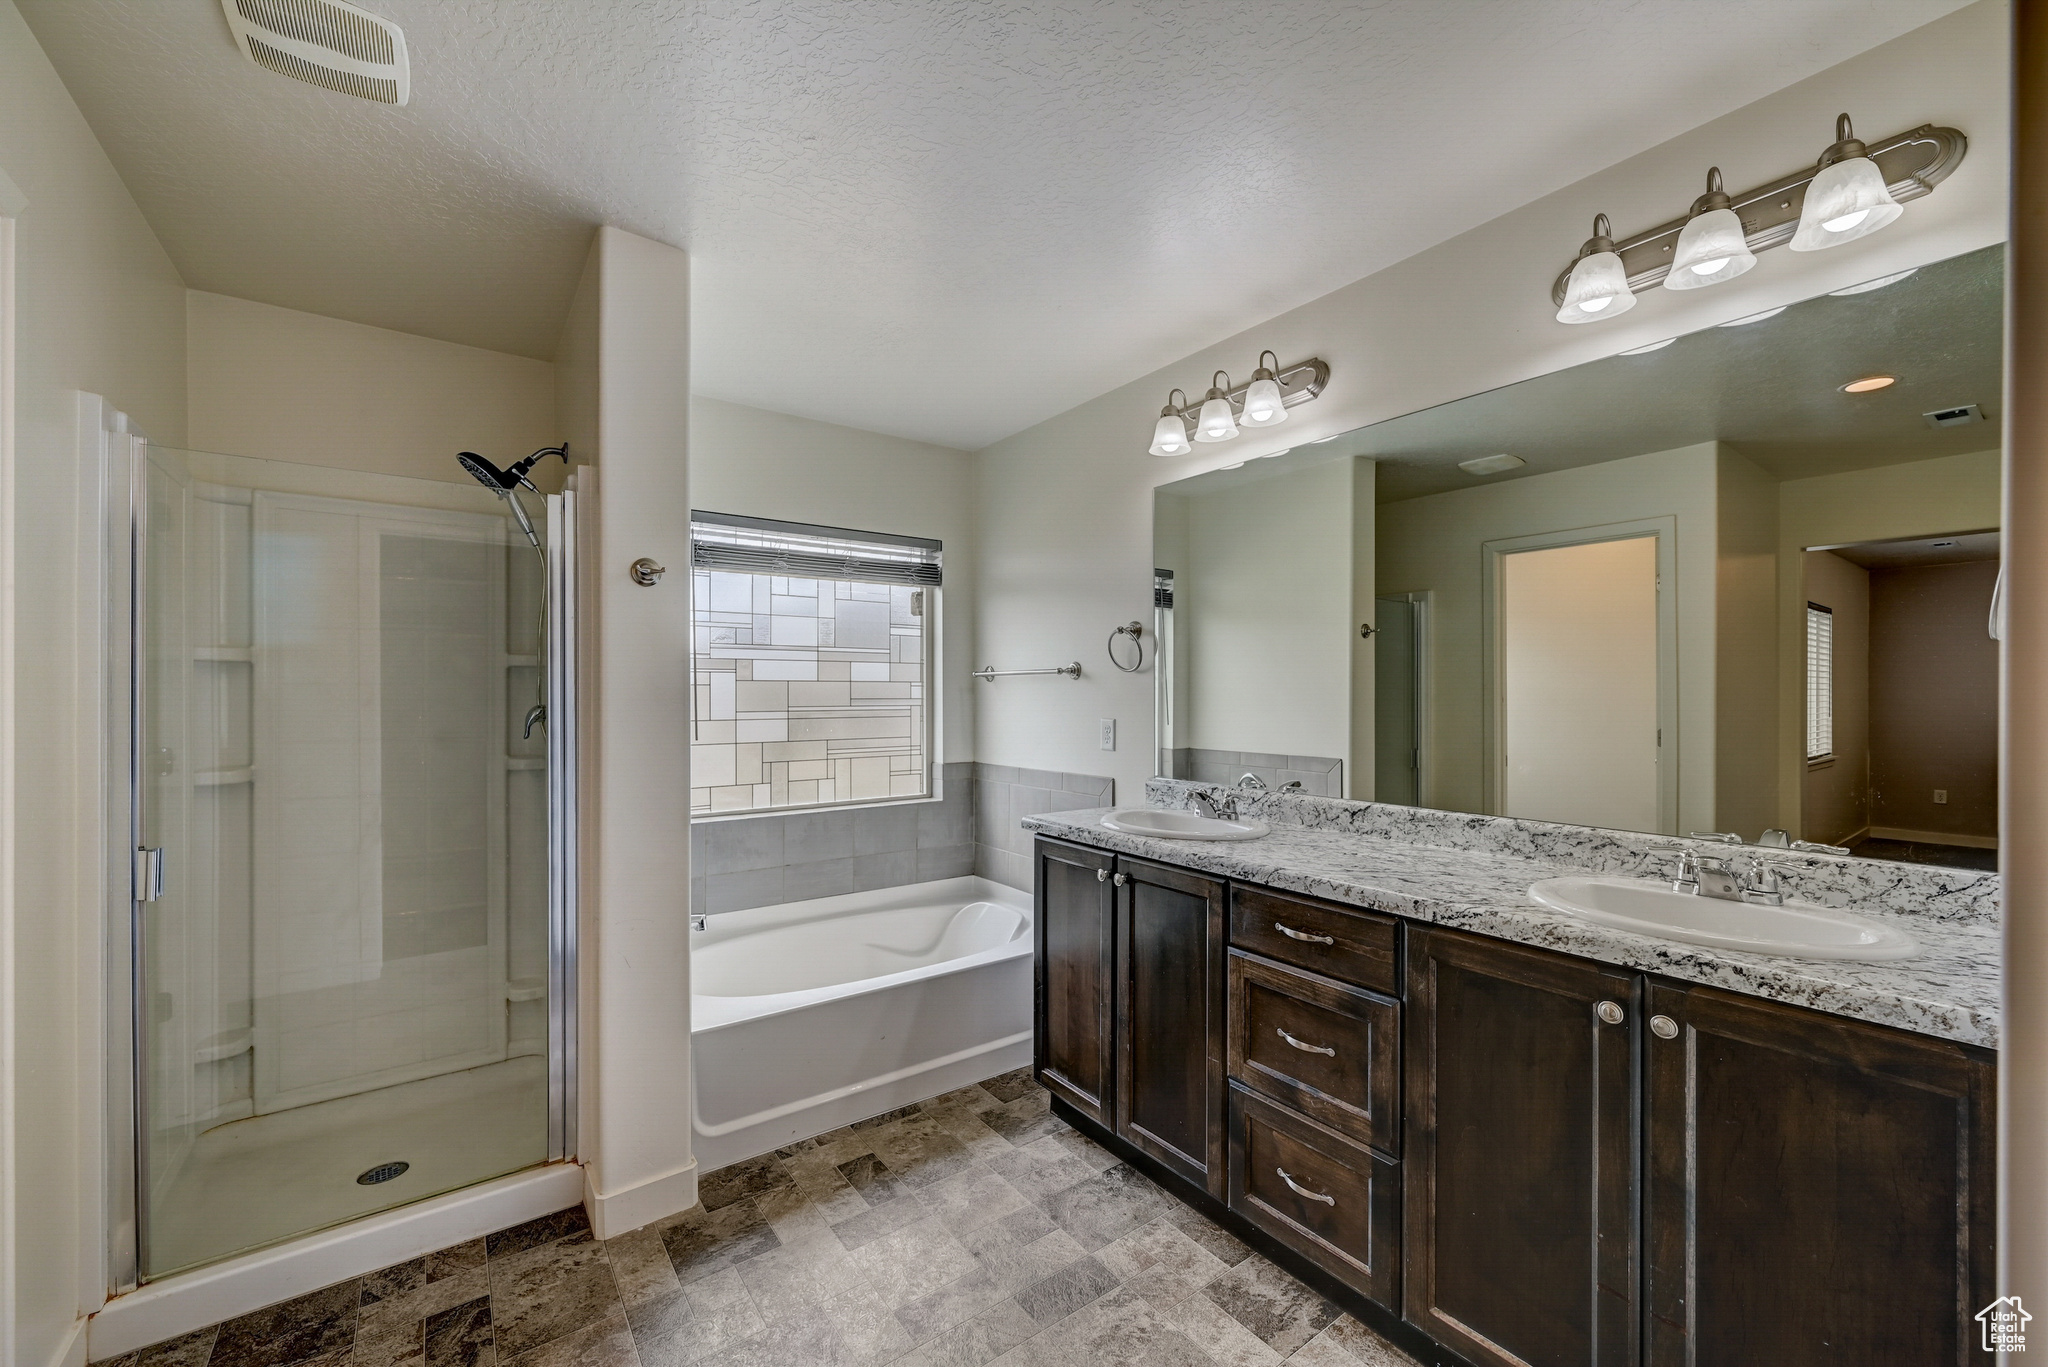 Bathroom with dual sinks, independent shower and bath, a textured ceiling, large vanity,